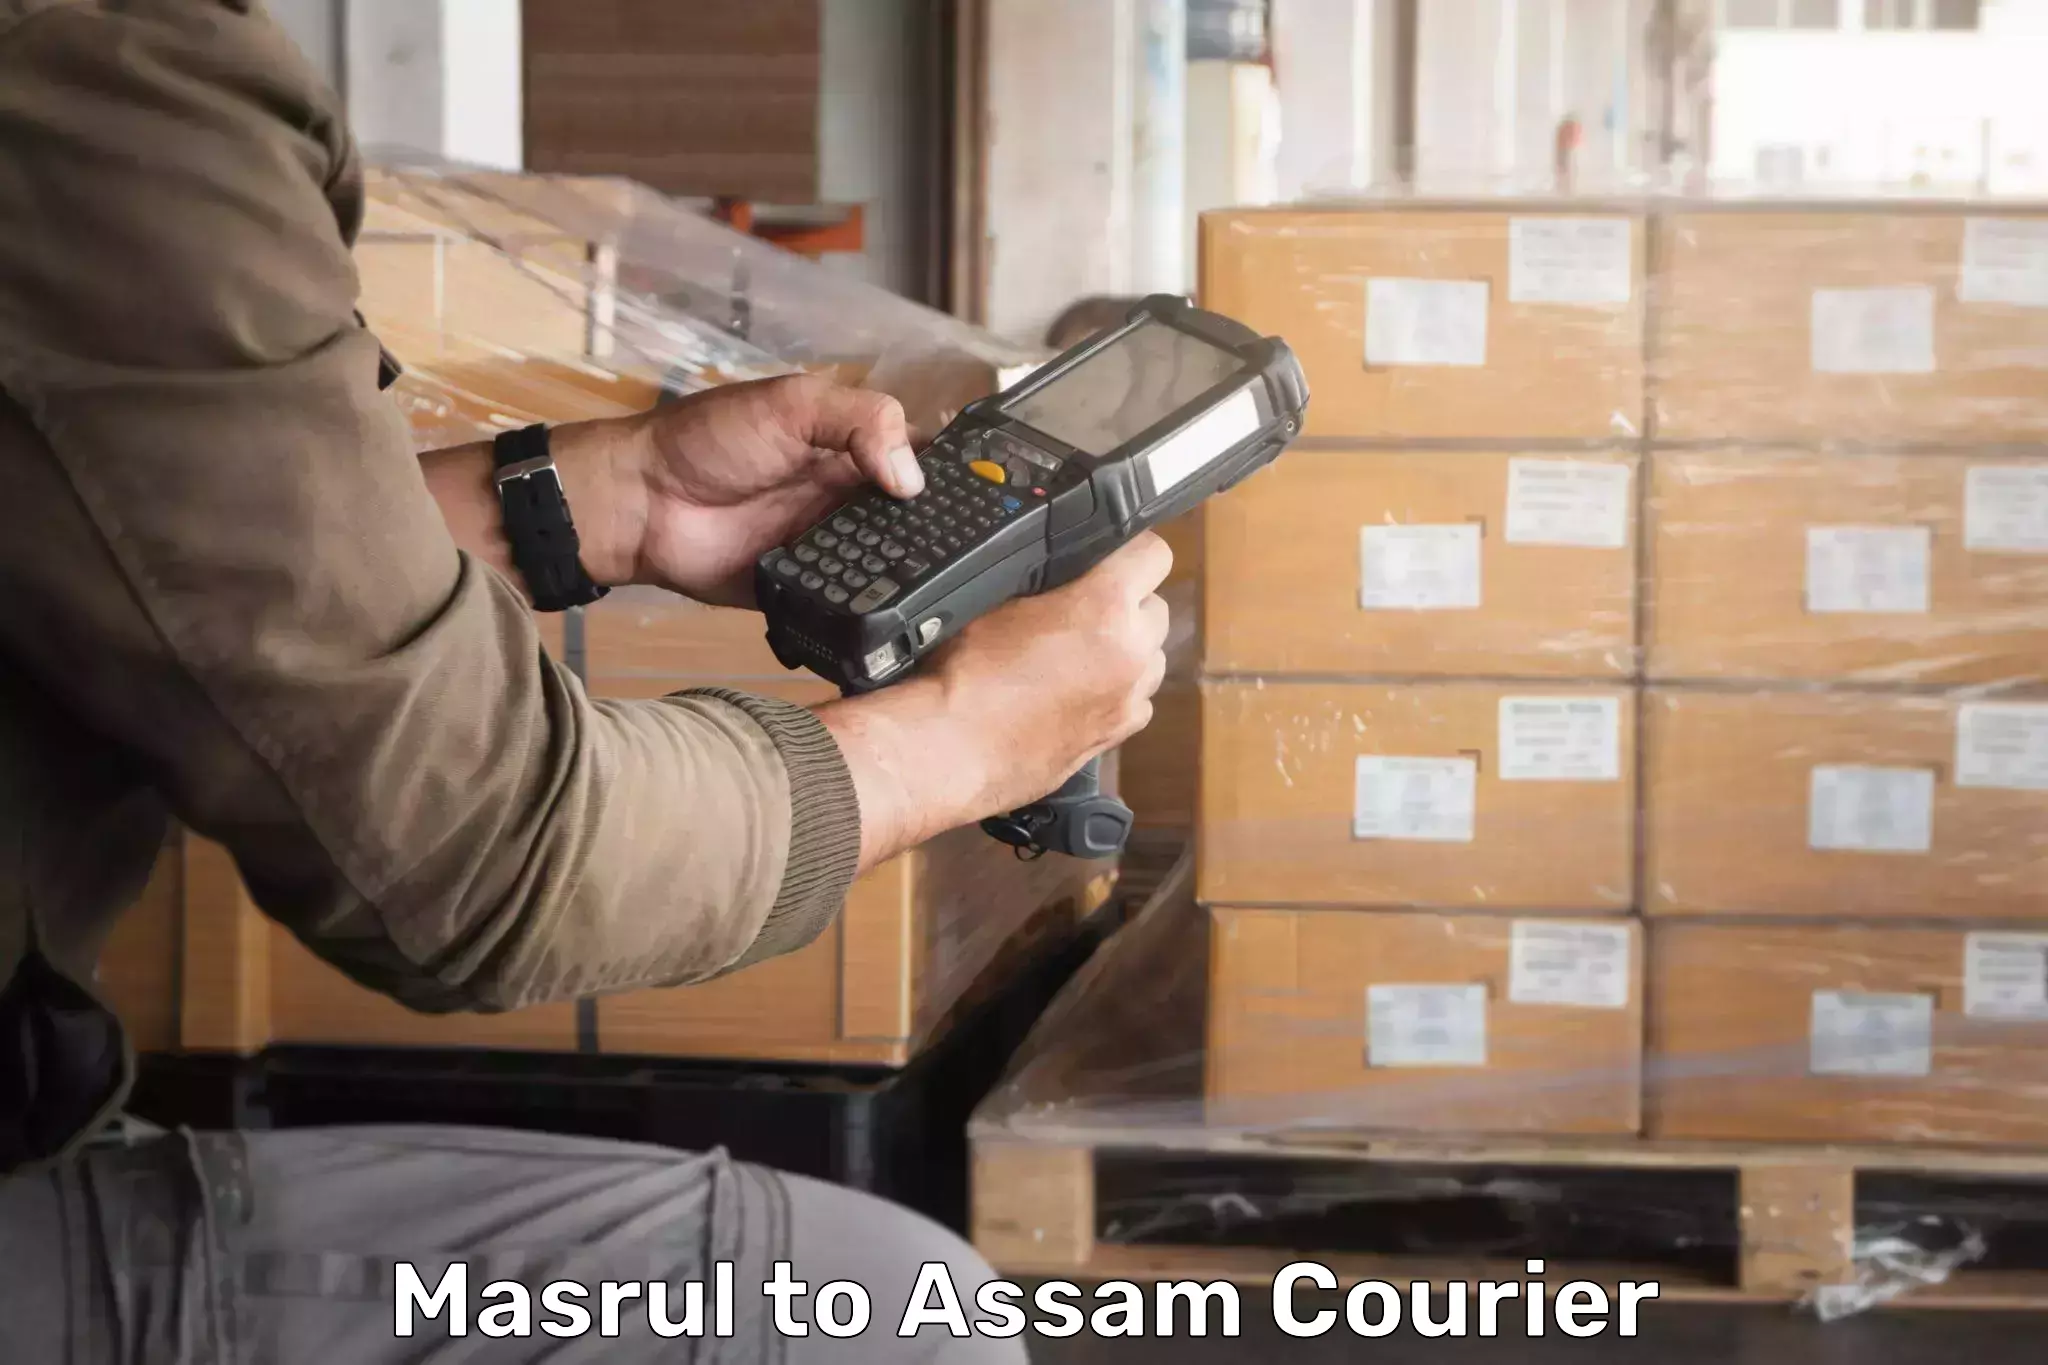 Custom courier packaging Masrul to Tezpur University